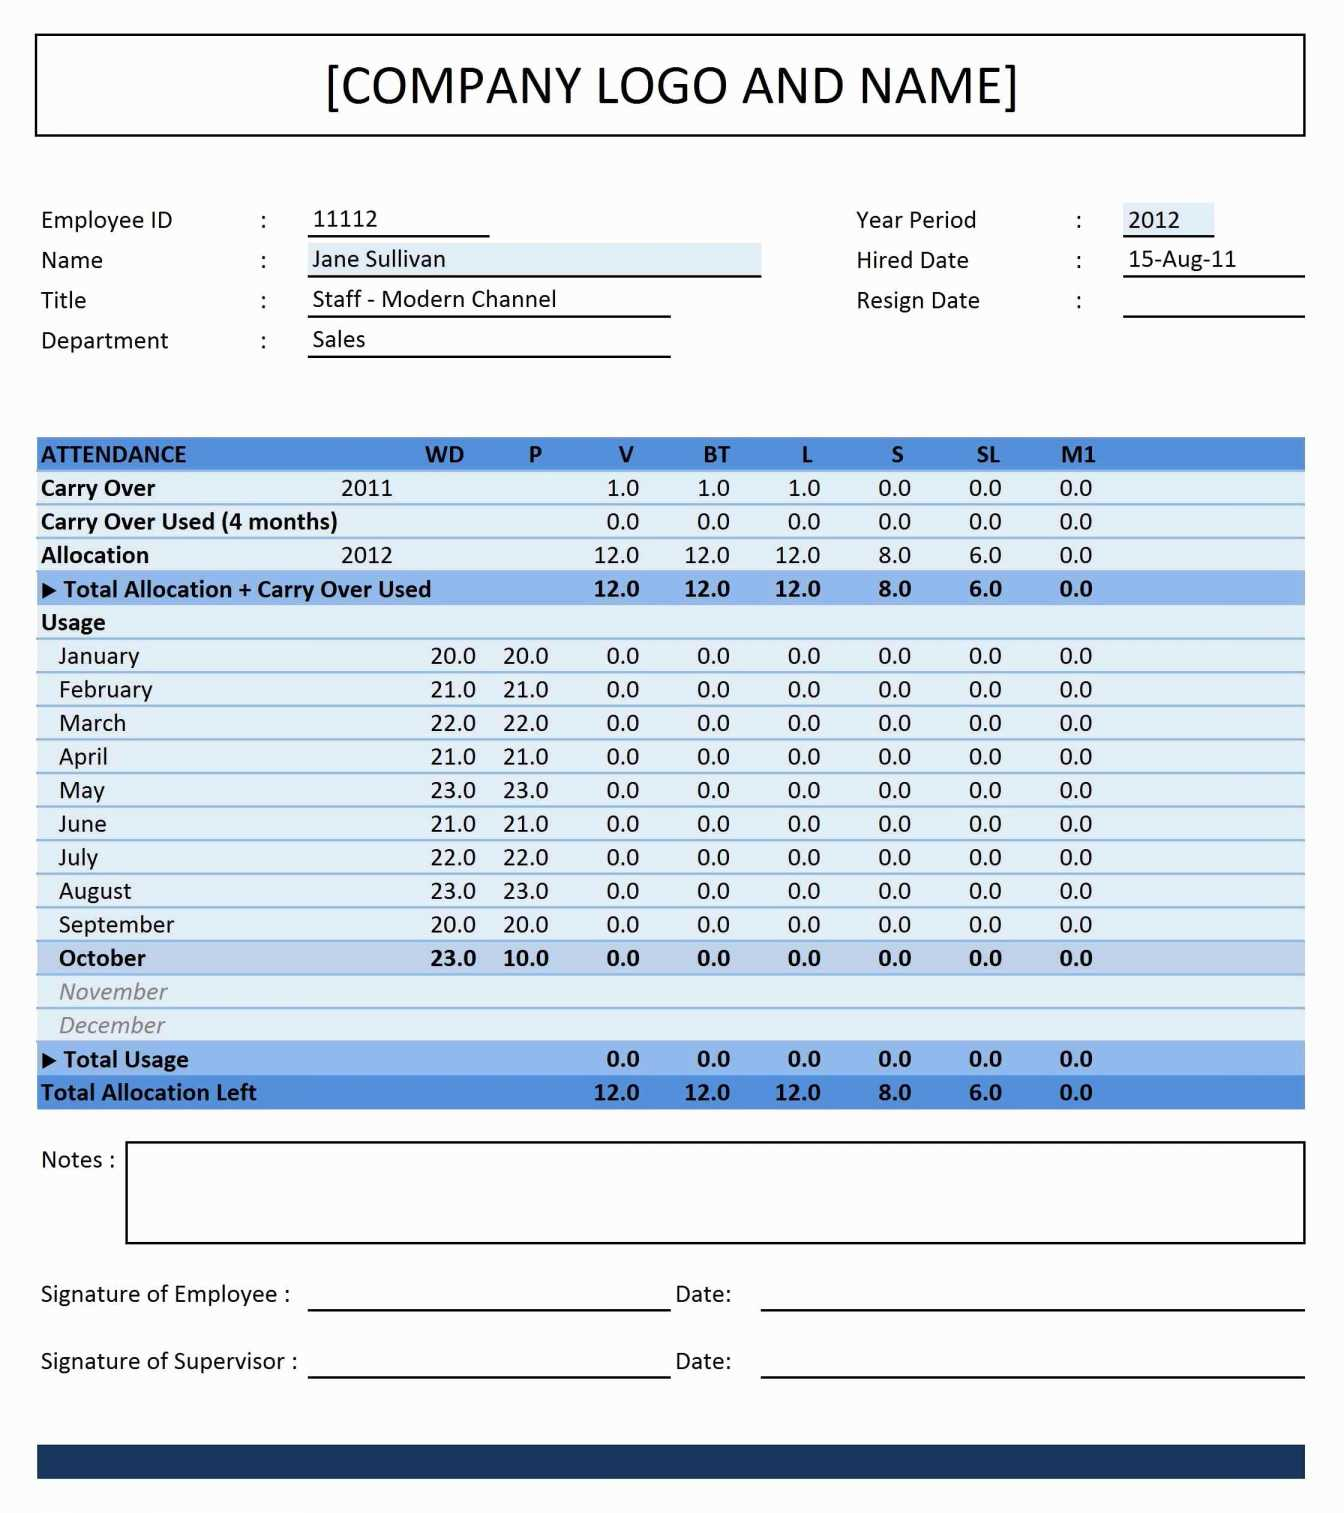 Simple Accounting Spreadsheet For Small Business Excel Templates For inside Basic Accounting Spreadsheet For Small Business